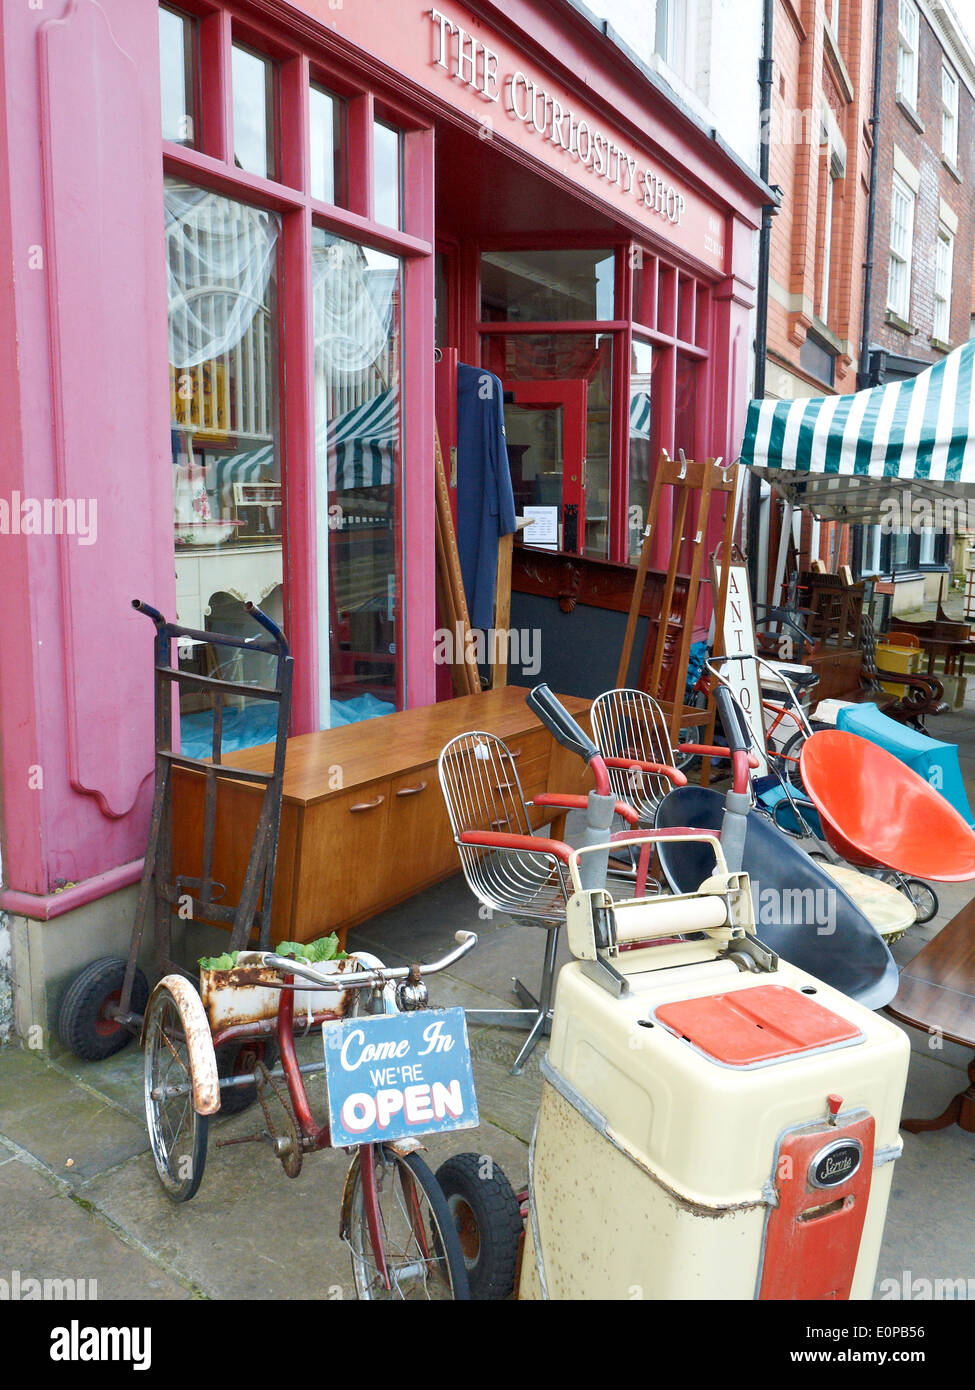 The curiosity shop in Stockport Cheshire UK Stock Photo